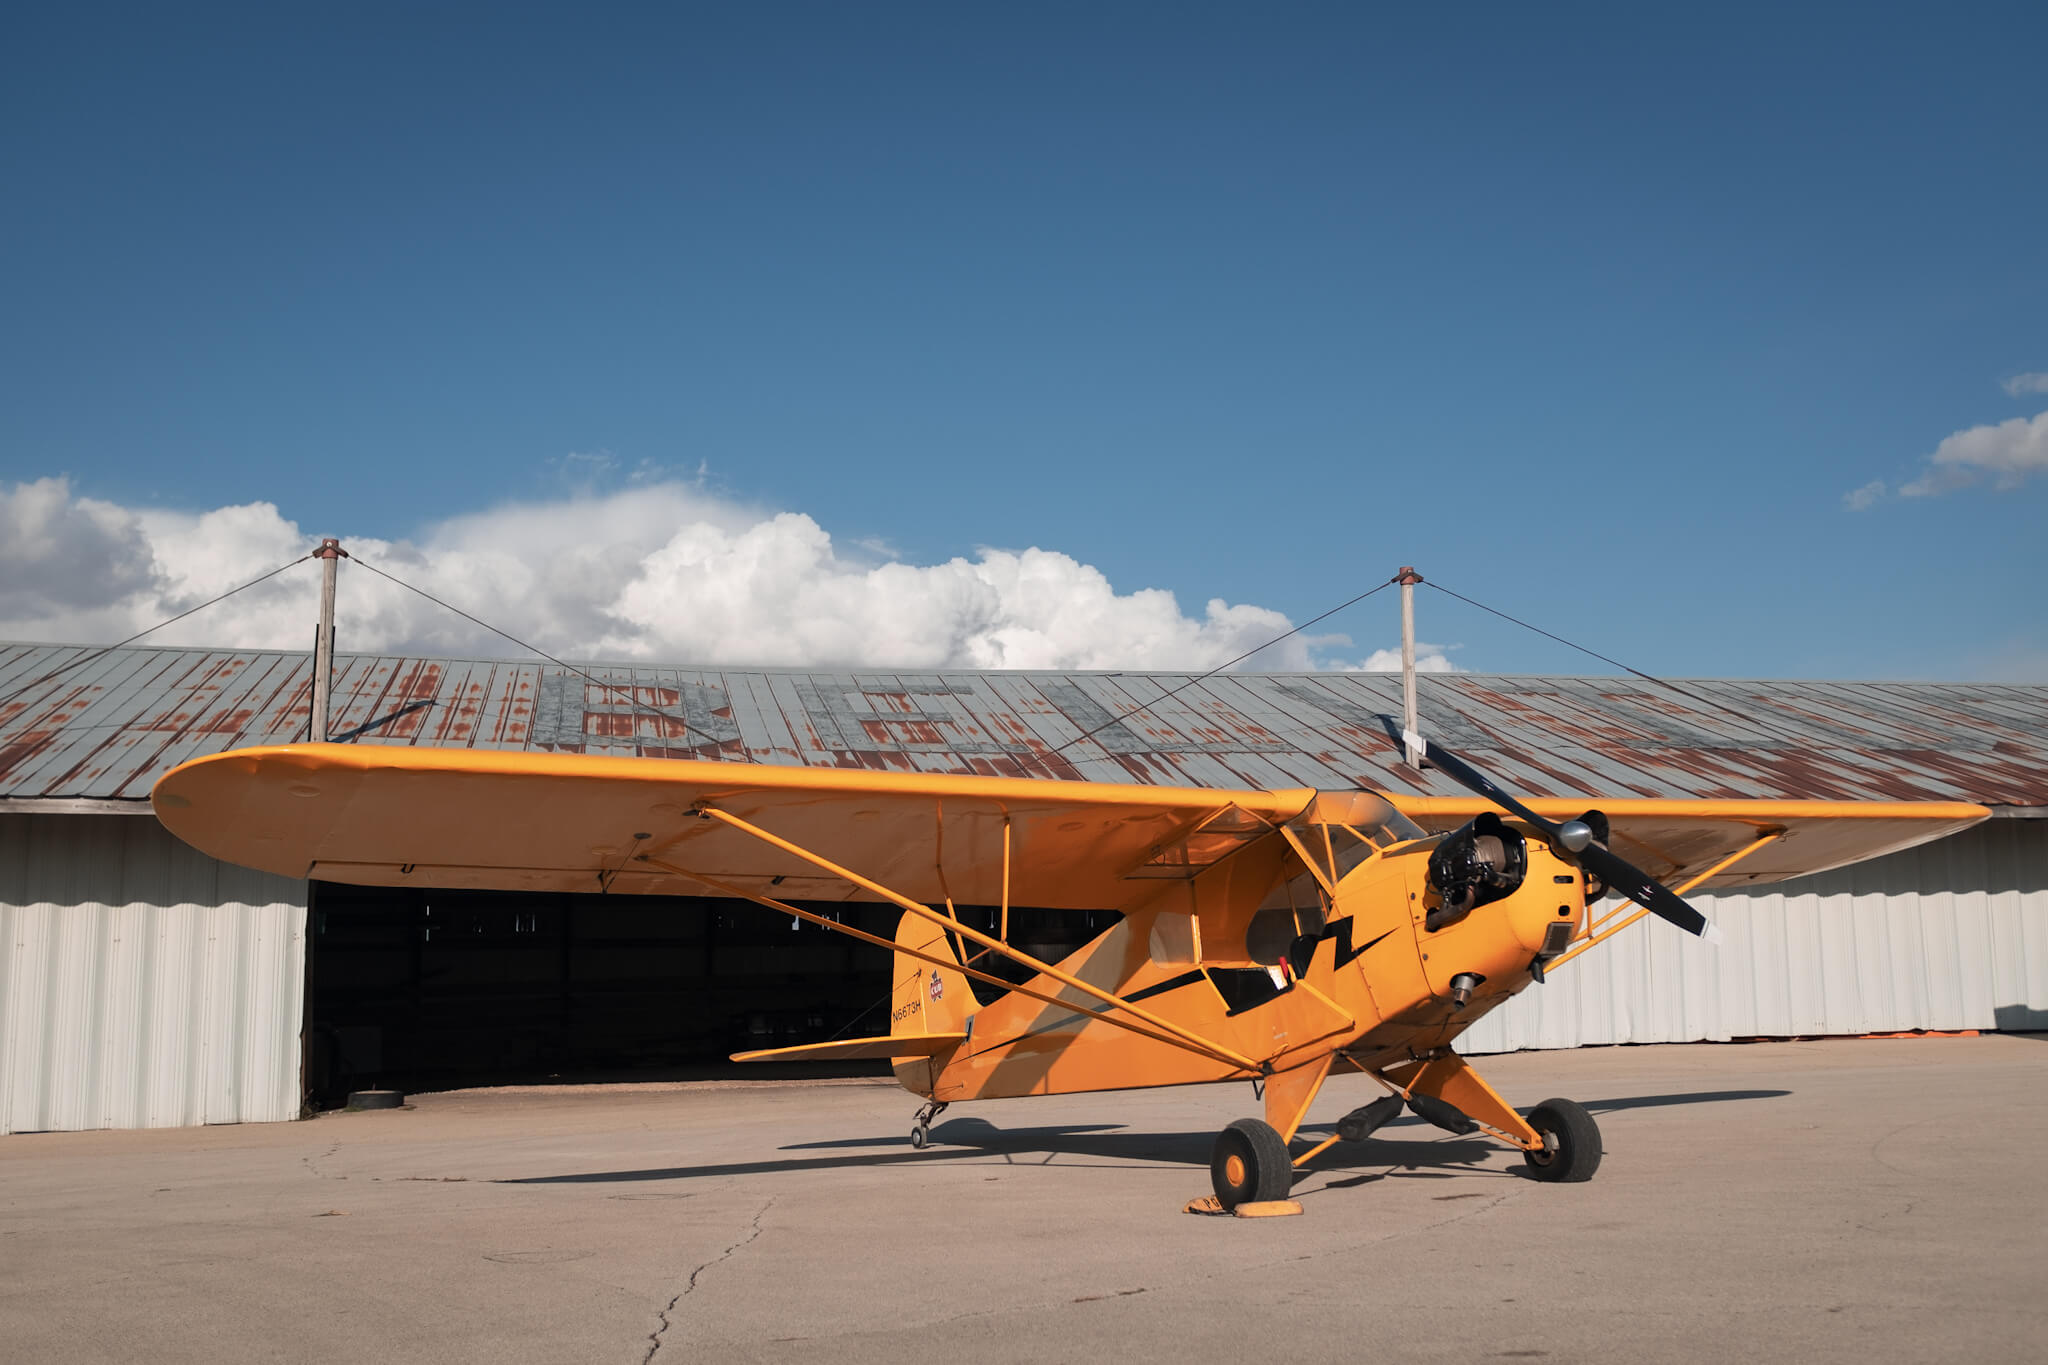 Yellow Piper J-3 Cub (N6673H) parked outside hangar at Poplar Grove Airport (C77) on sunny day